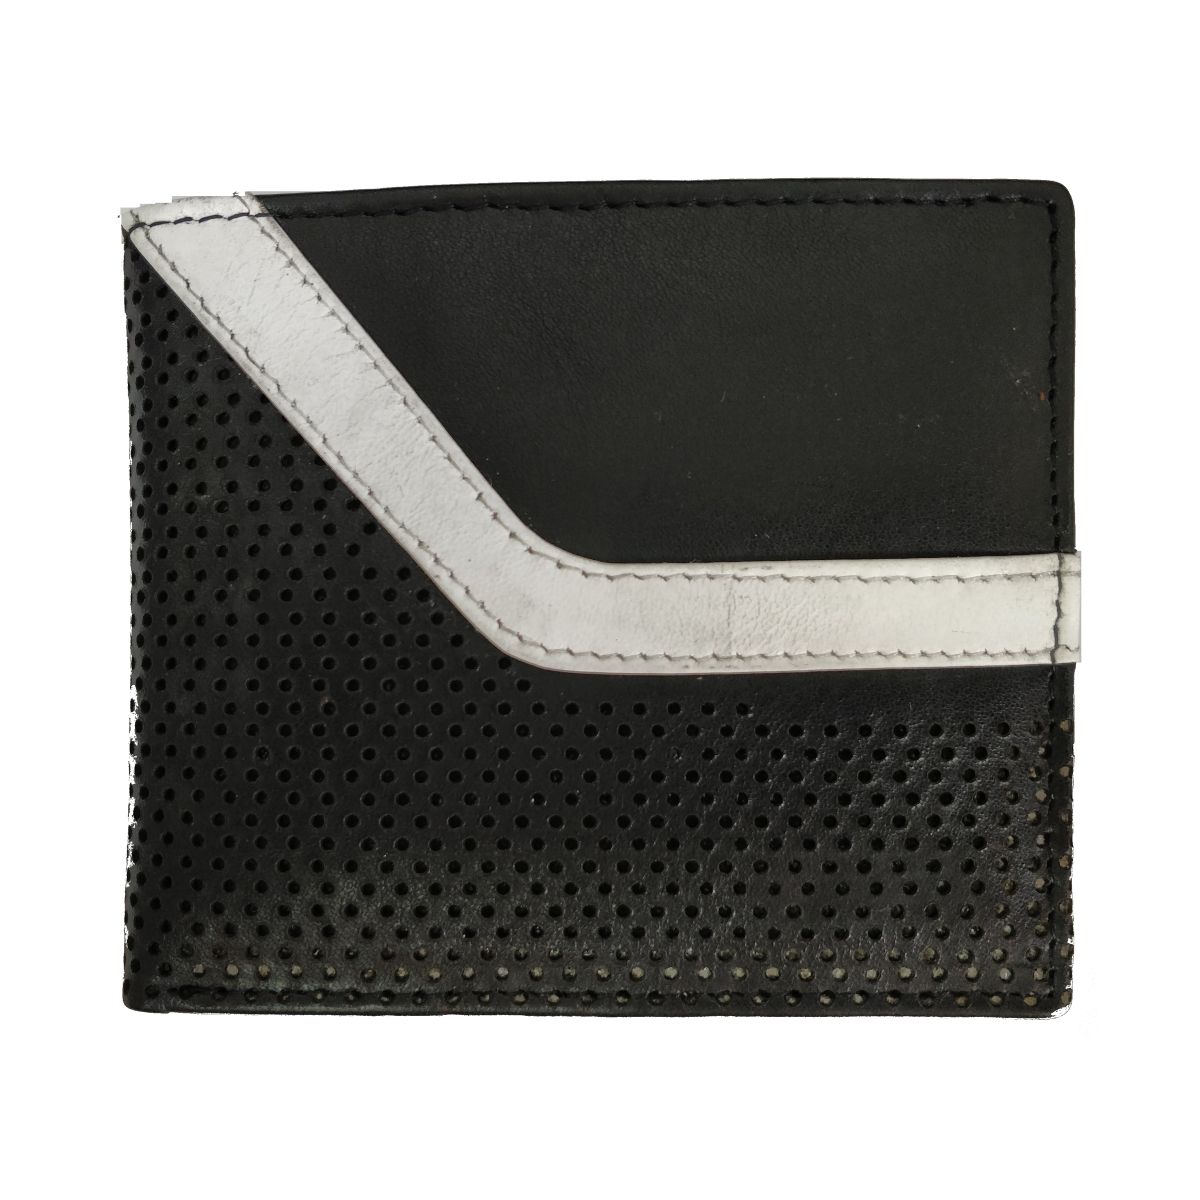 Leather Wallet With Broken Strip and Coin Pouch - Black/Blue